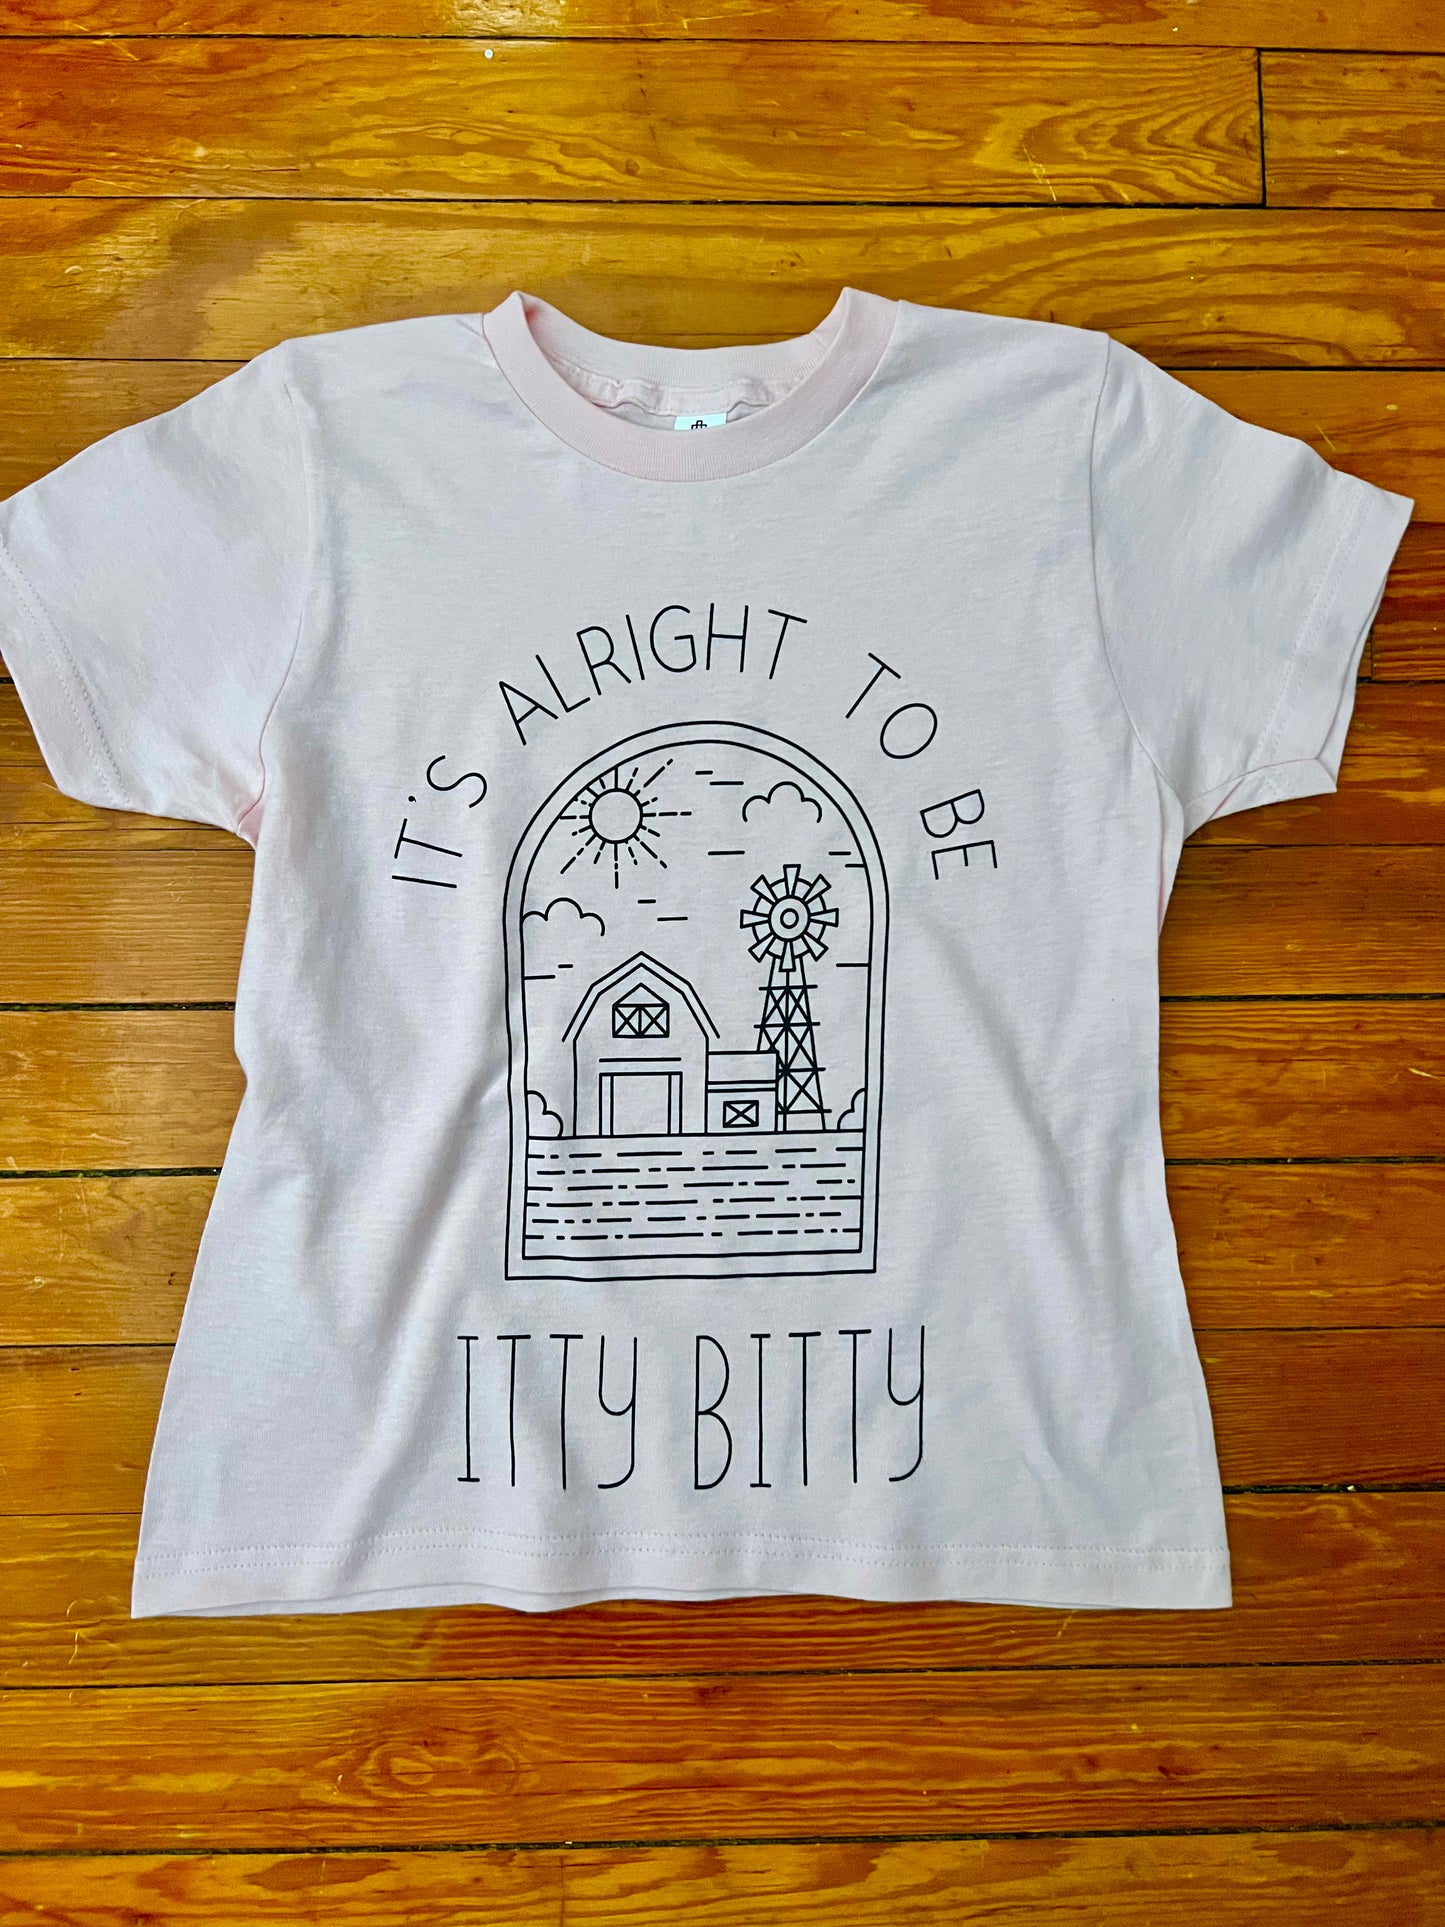 It’s Alright to be Itty Bitty Tee